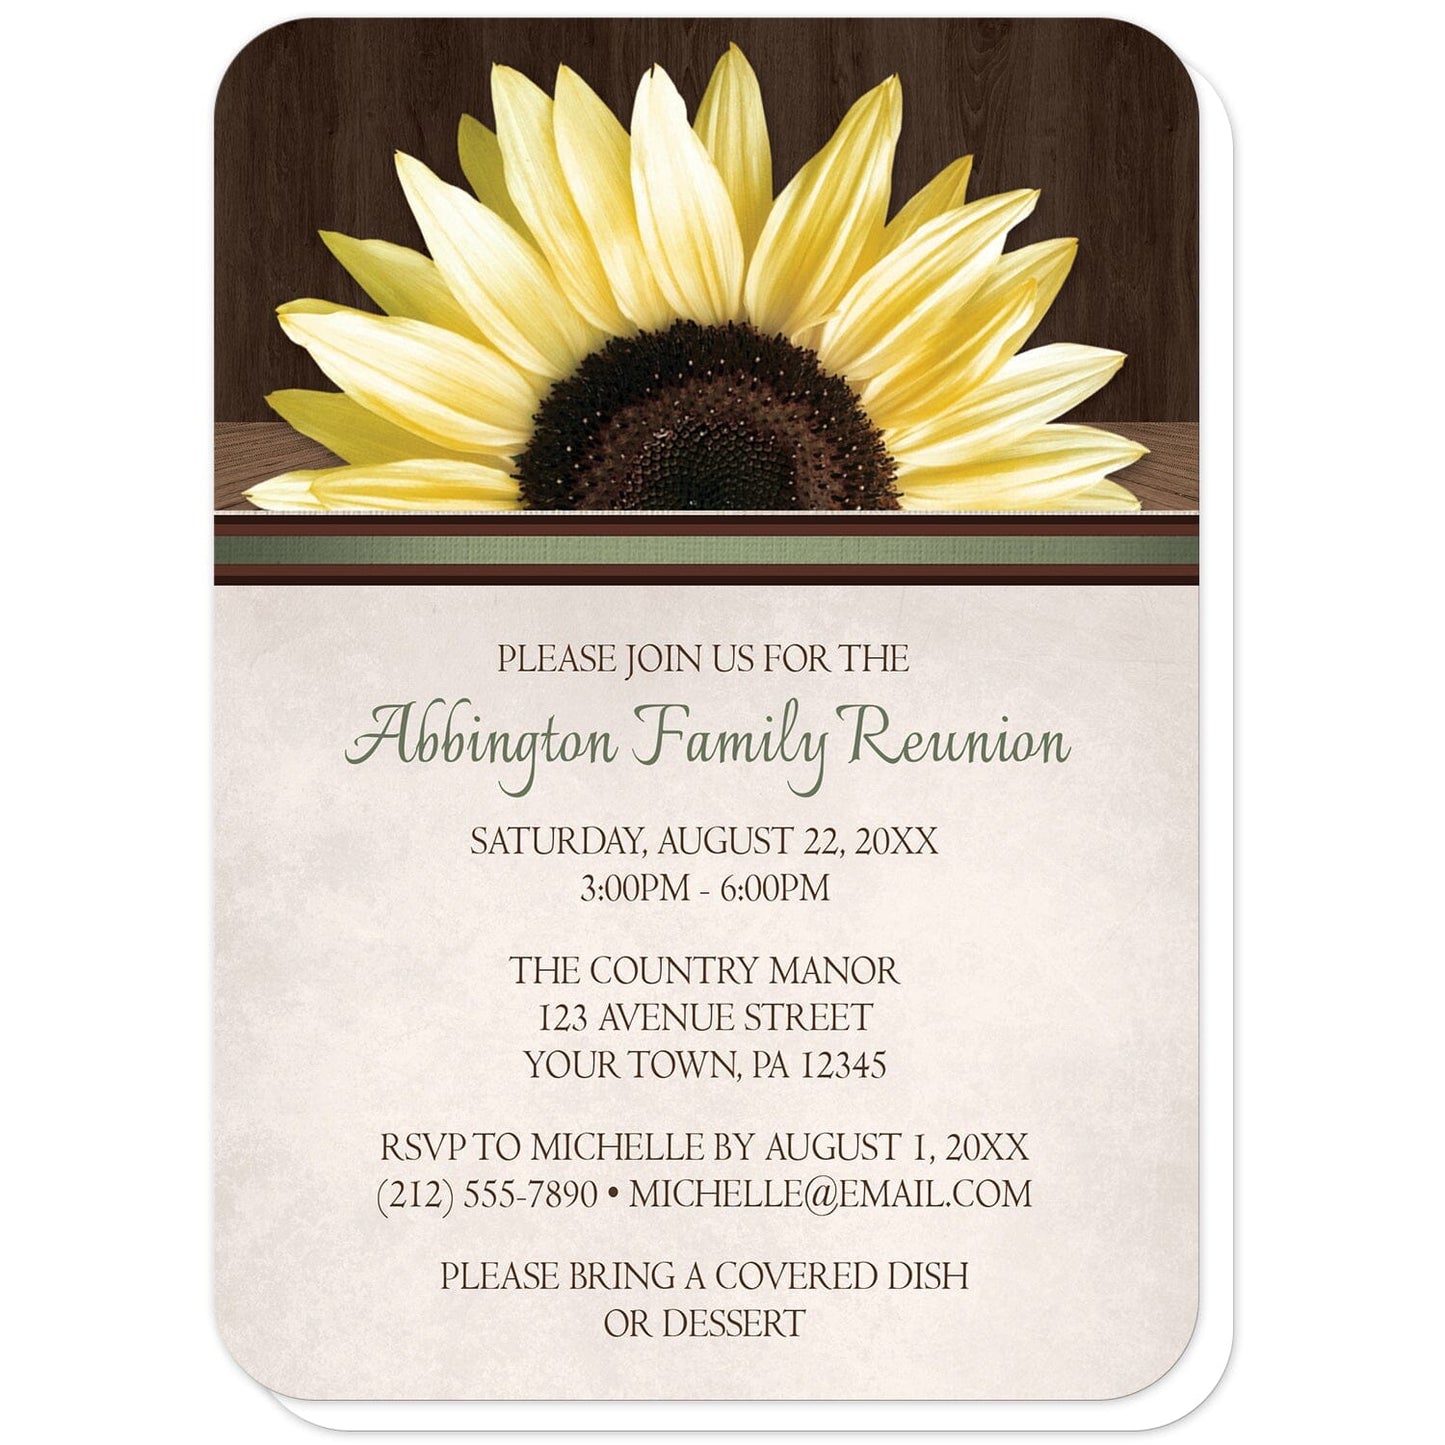 Country Sunflower Over Wood Rustic Family Reunion Invitations (with rounded corners) at Artistically Invited. Country sunflower over wood rustic family reunion invitations with a lovely big yellow sunflower over a rustic dark brown wood pattern along the top above a beige parchment background illustration. Your personalized reunion celebration details are elegantly printed in green and brown below the sunflower. 